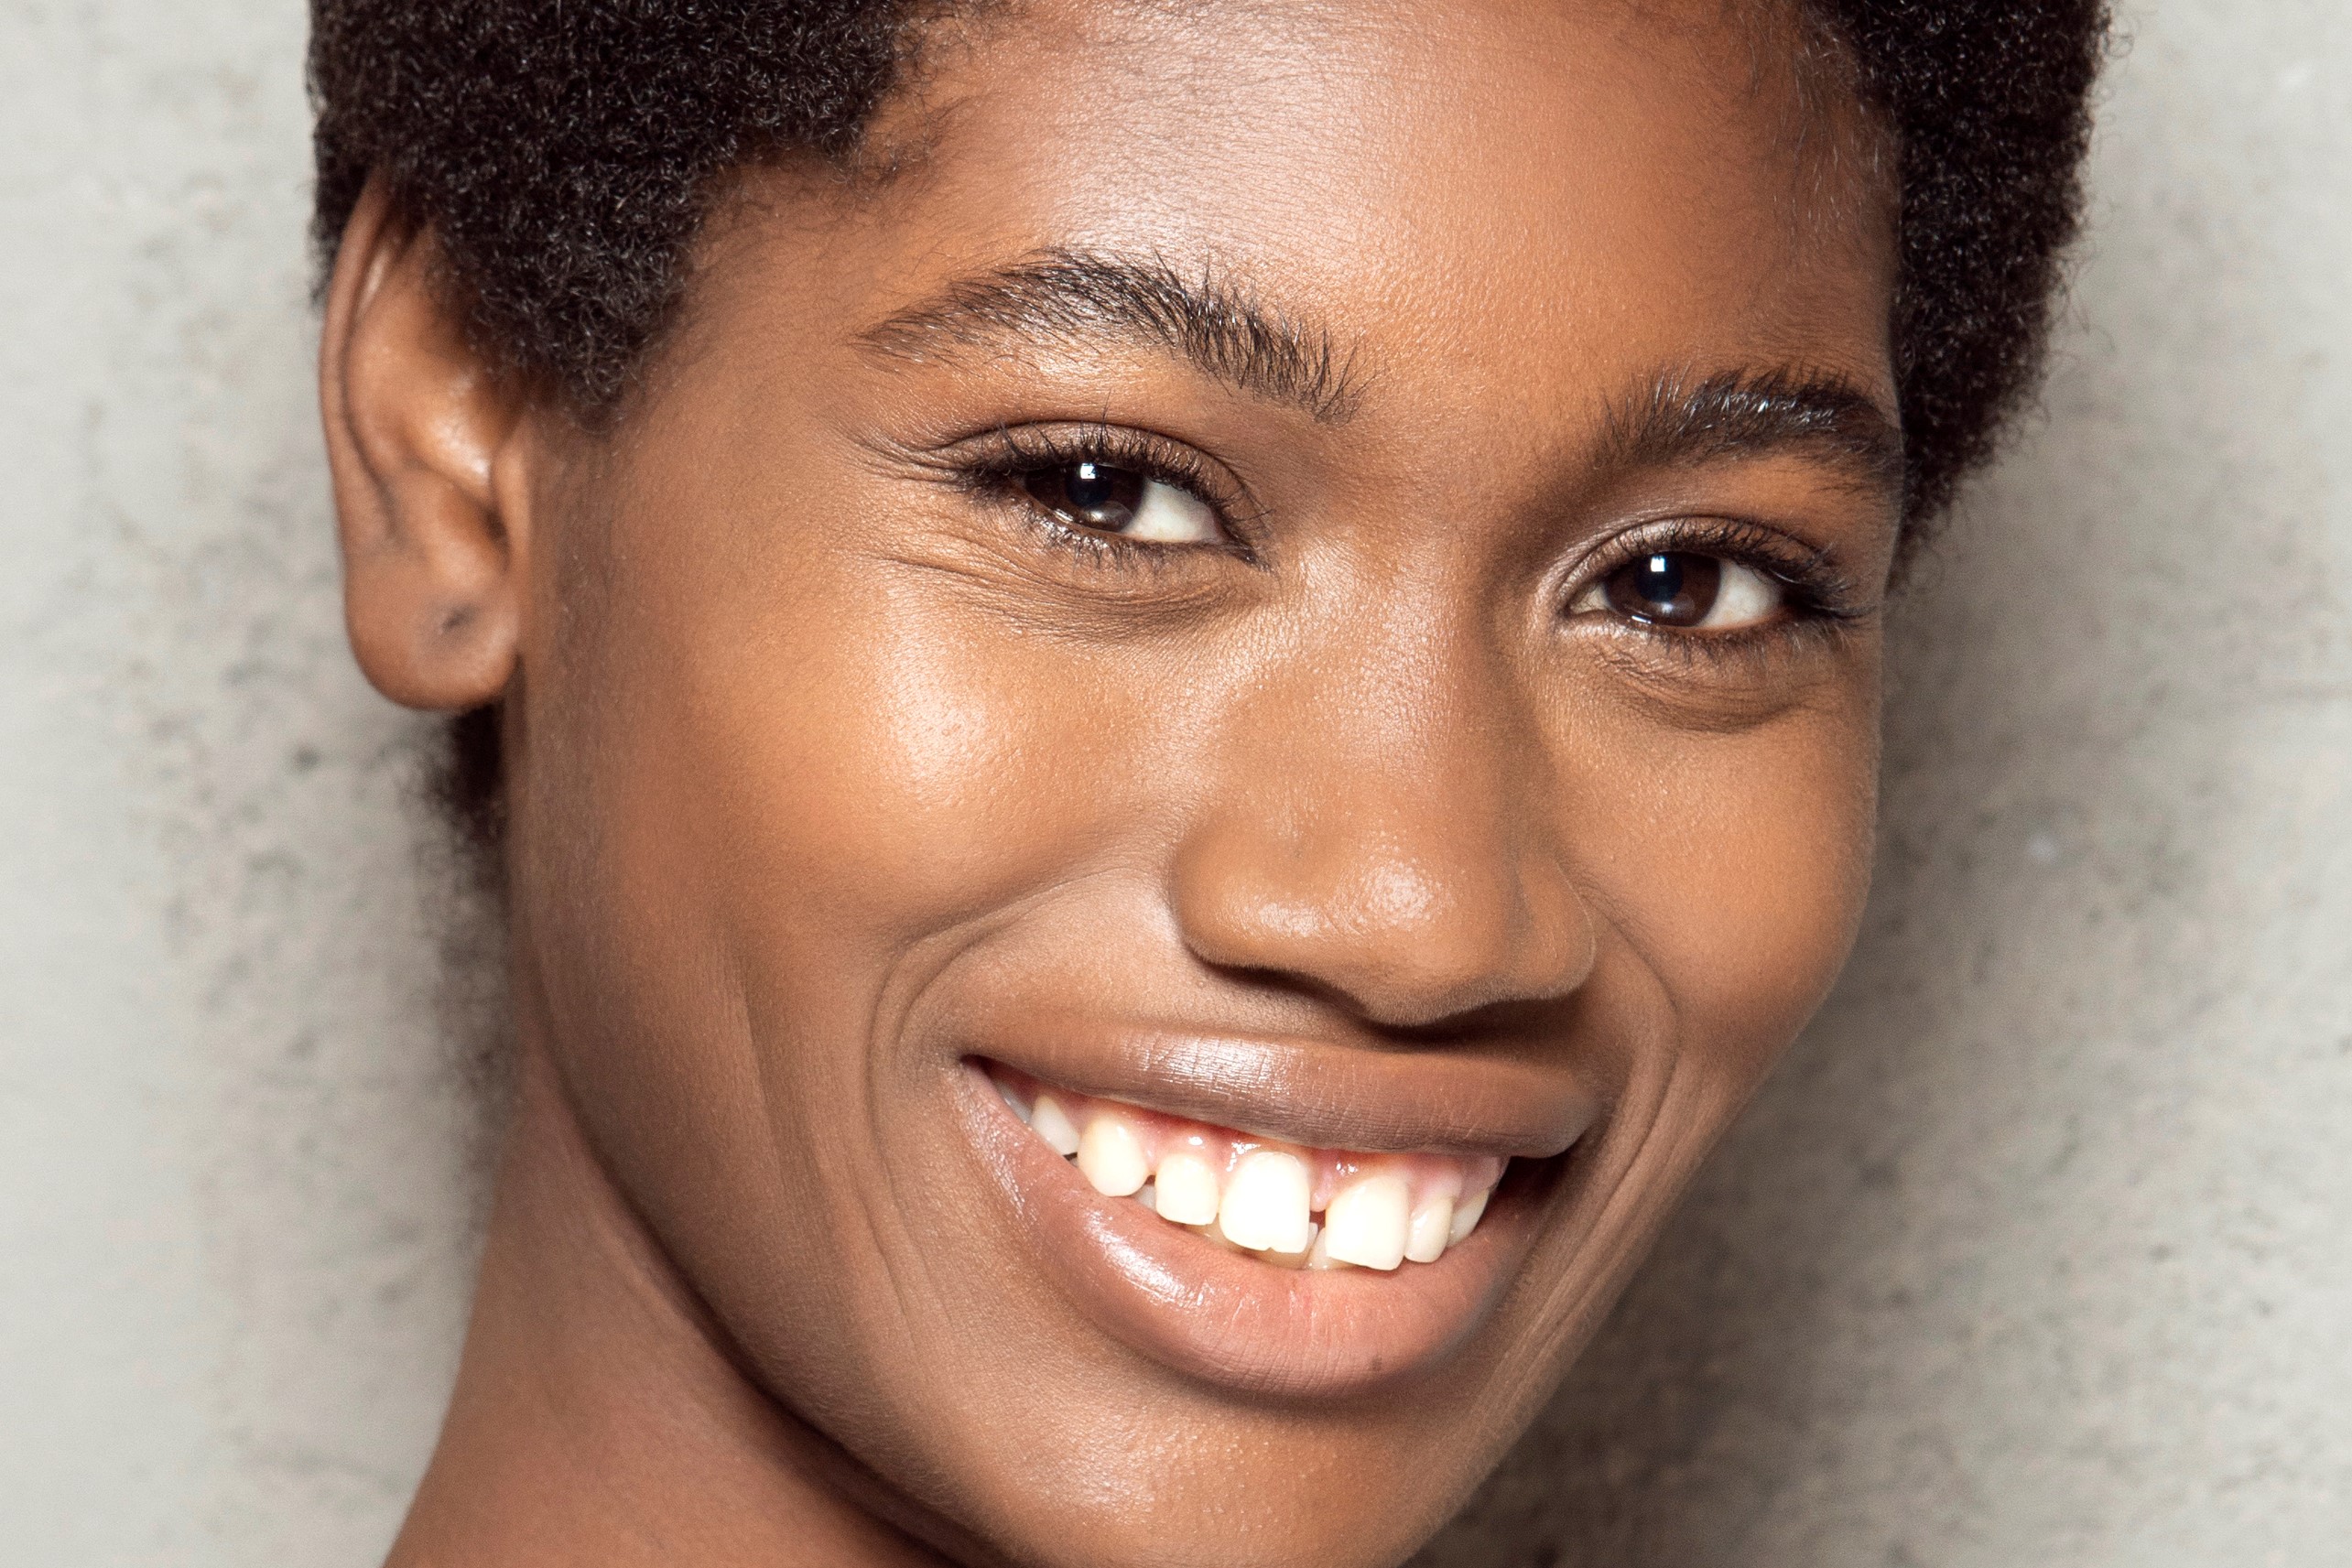 Why SPF Is Essential In A Black Person’s Routine